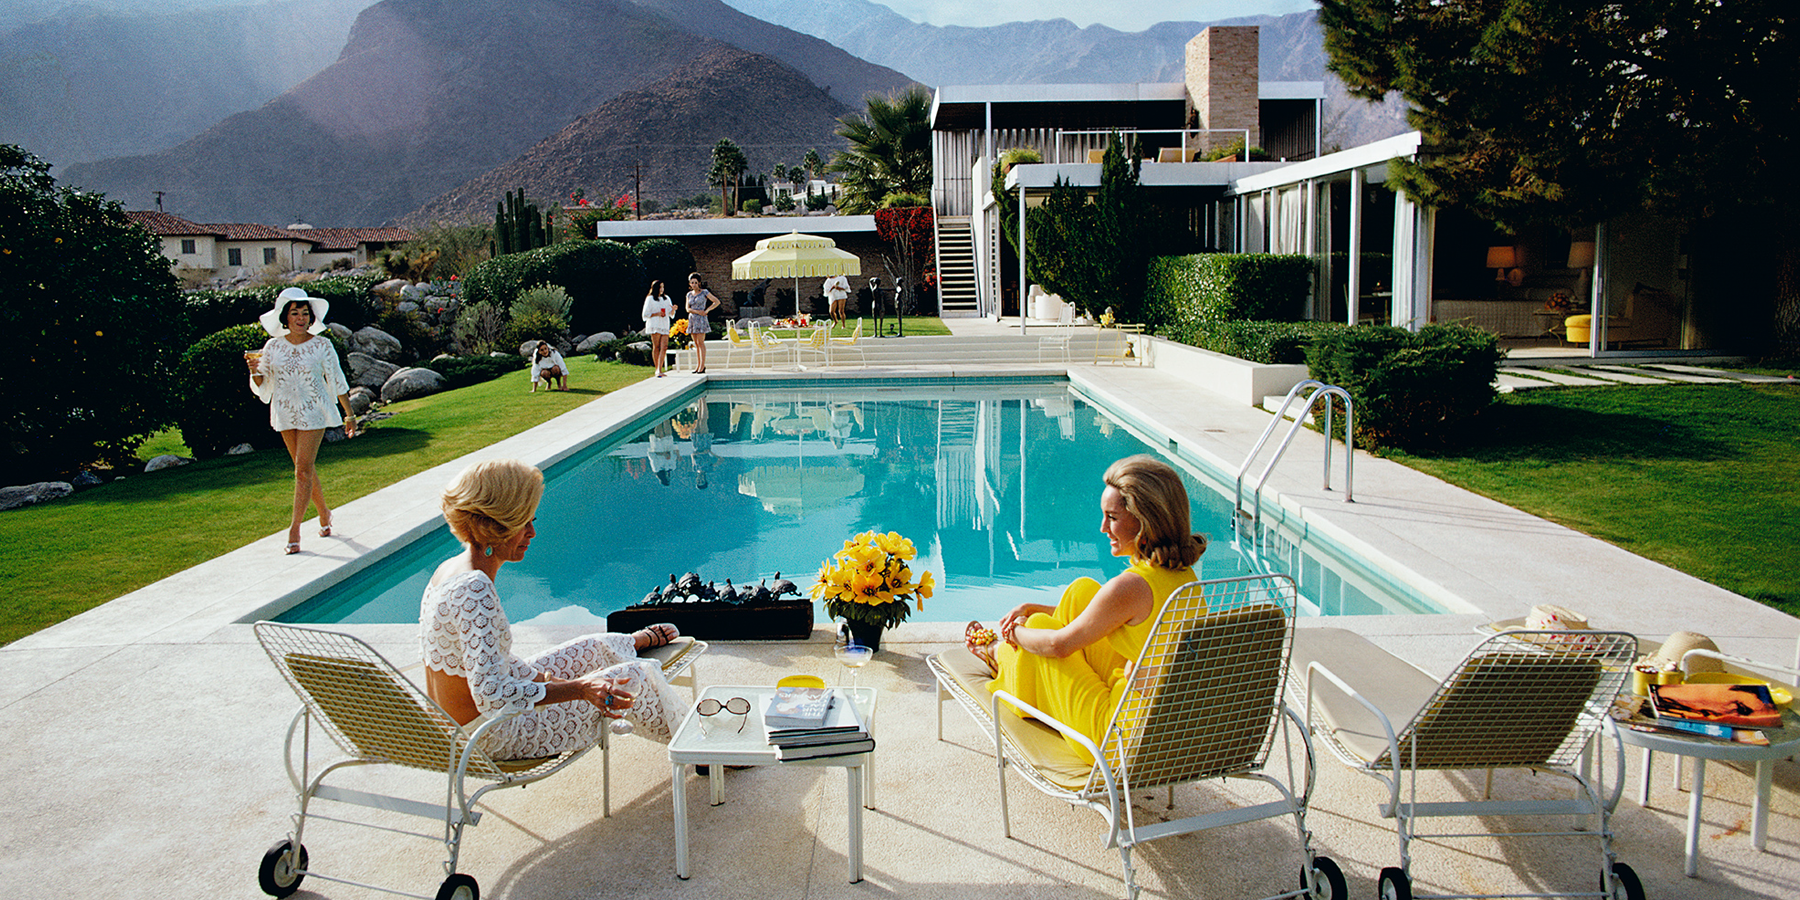 getty images gallery_arriving in style by slim aarons